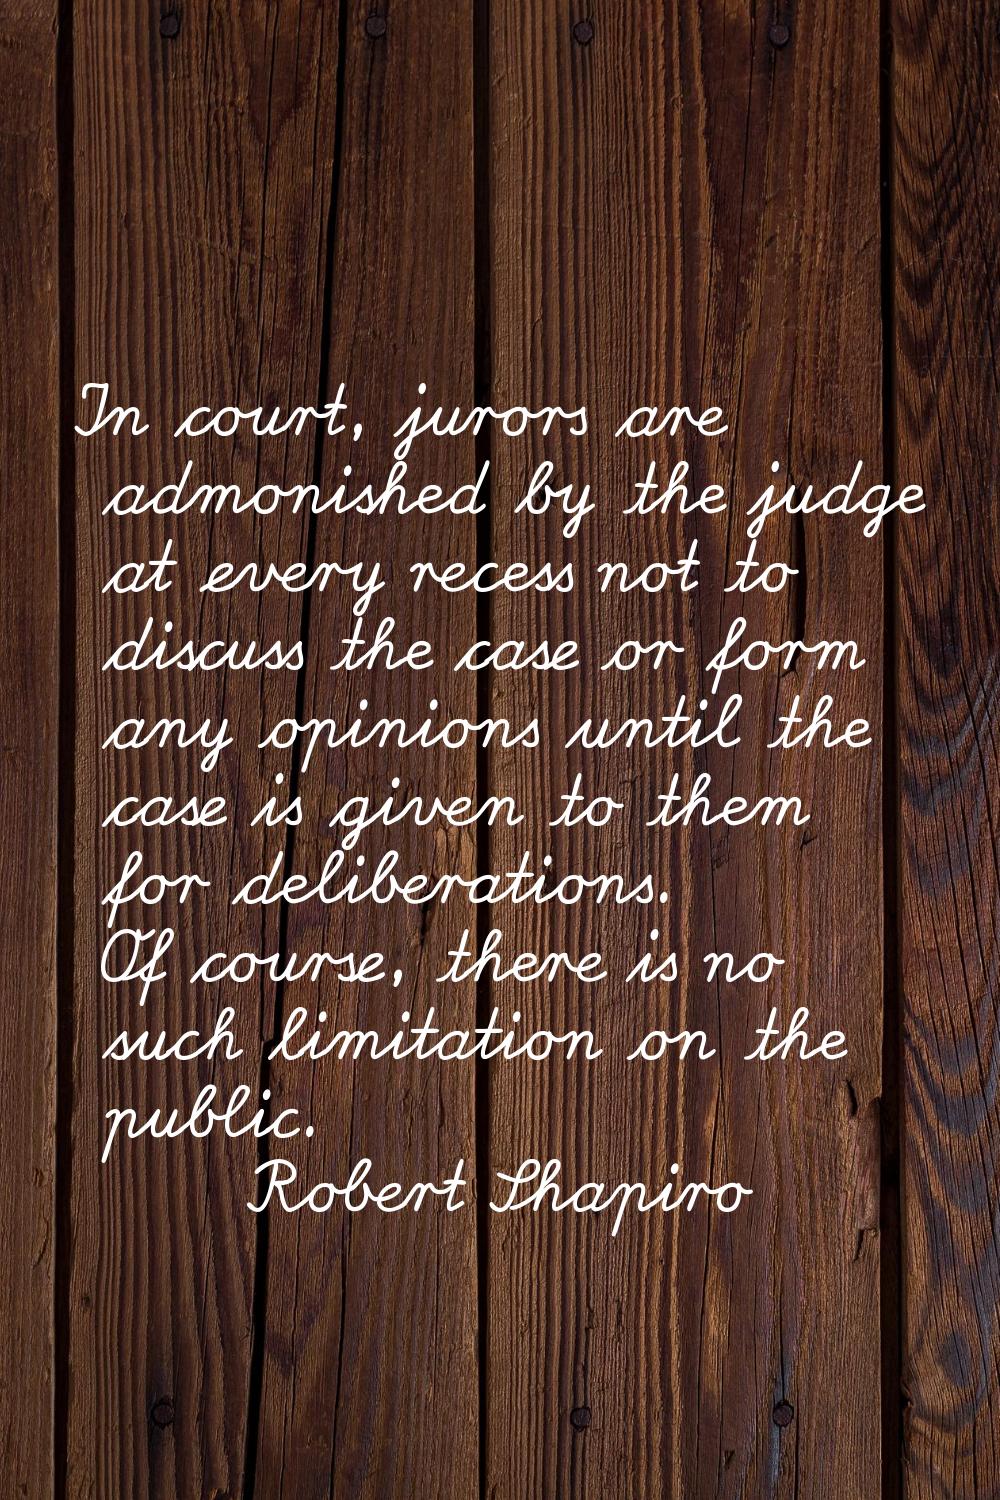 In court, jurors are admonished by the judge at every recess not to discuss the case or form any op